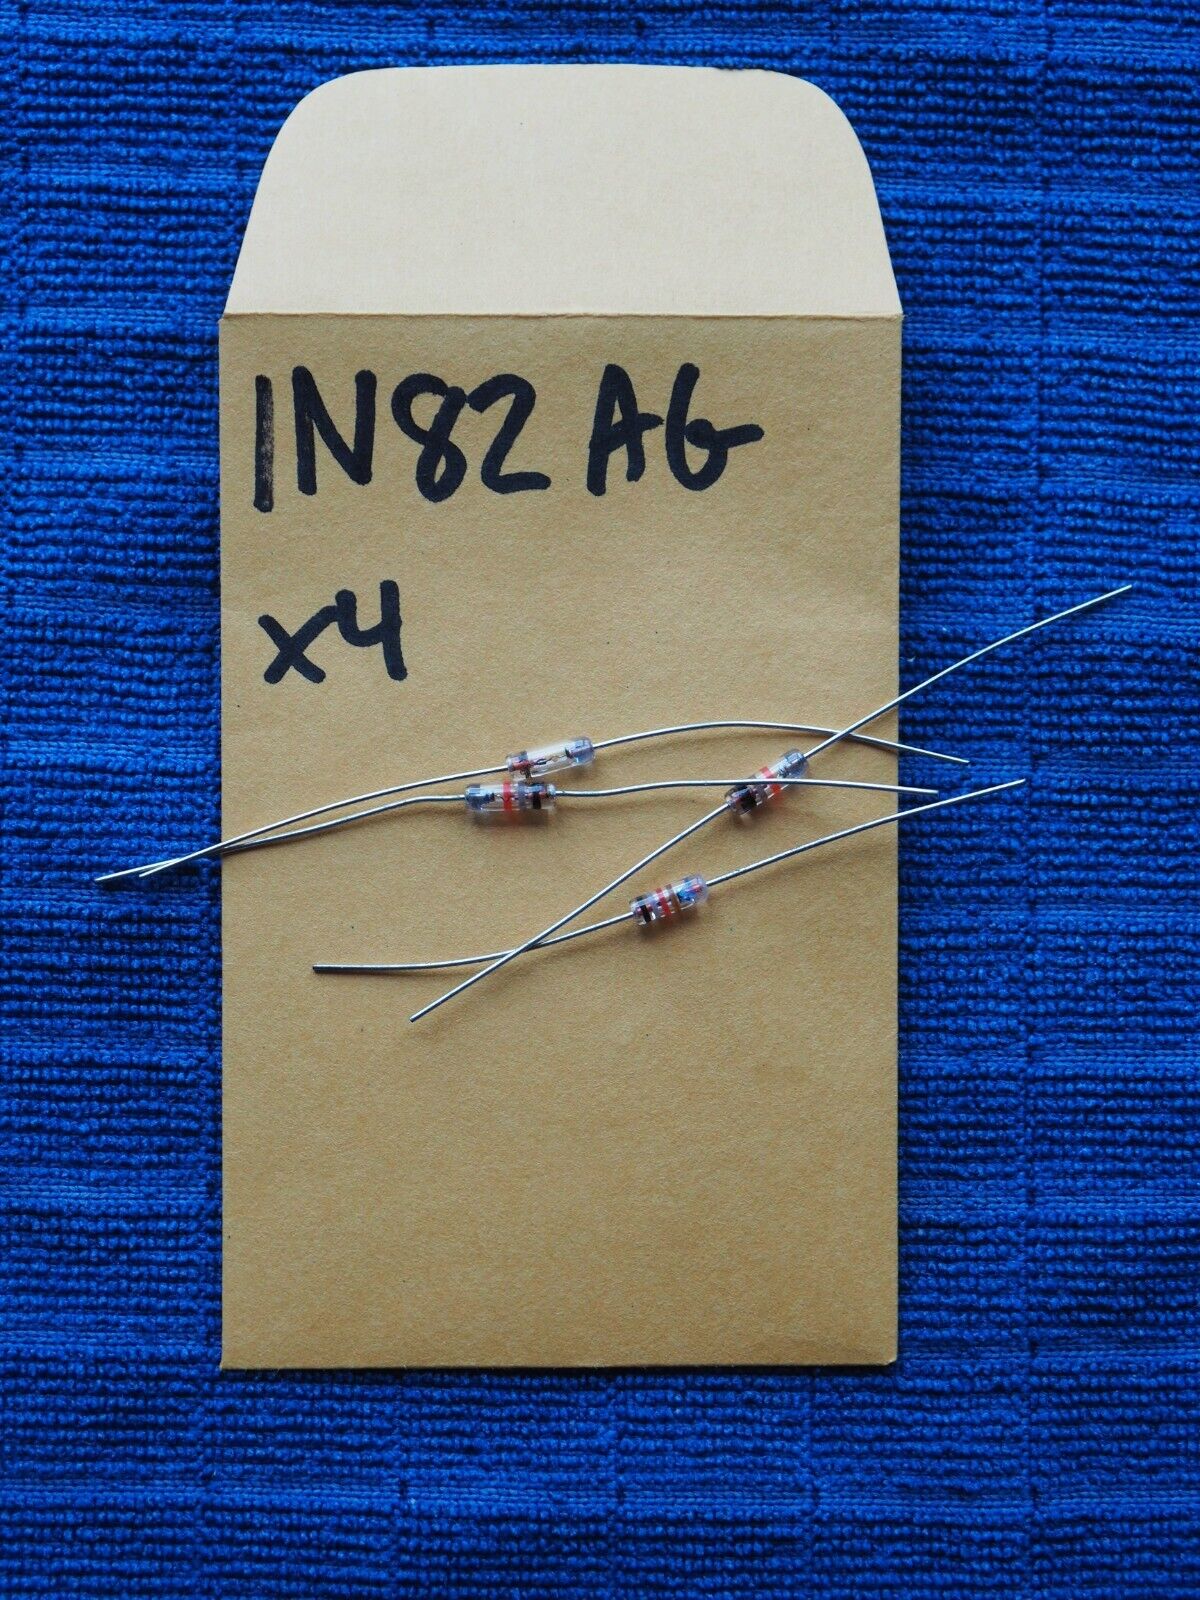 Lot of 4 NOS Vintage 1N82AG UHF Band Silicon Diode Tested DO-7